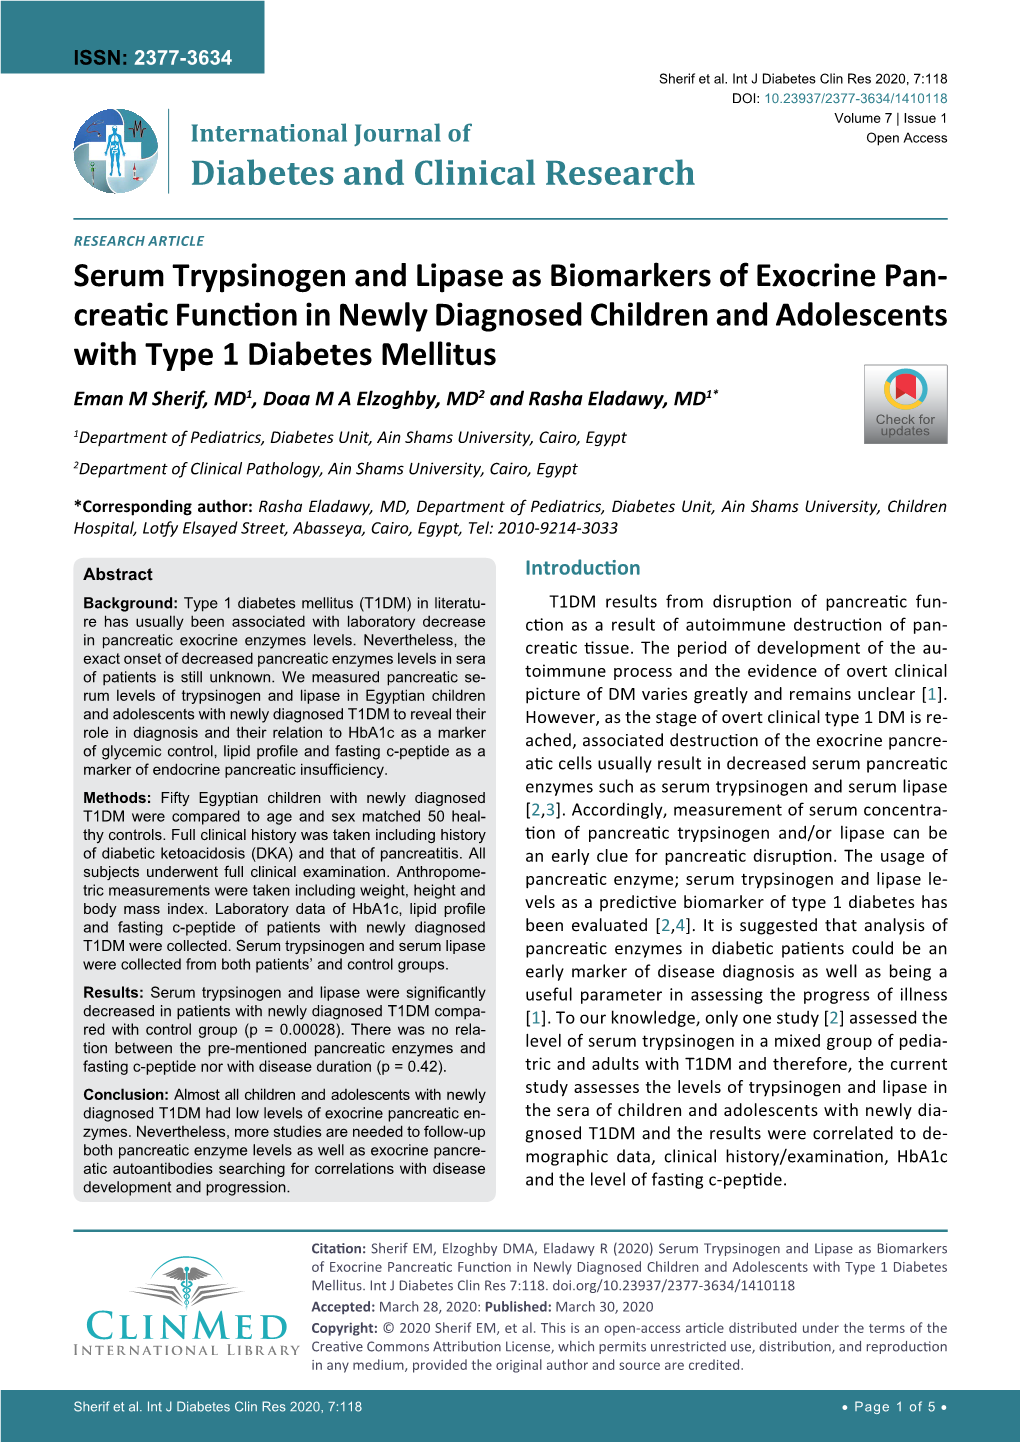 Serum Trypsinogen and Lipase As Biomarkers of Exocrine Pancreatic Function in Newly Diagnosed Children and Adolescents with Type 1 Diabetes Mellitus